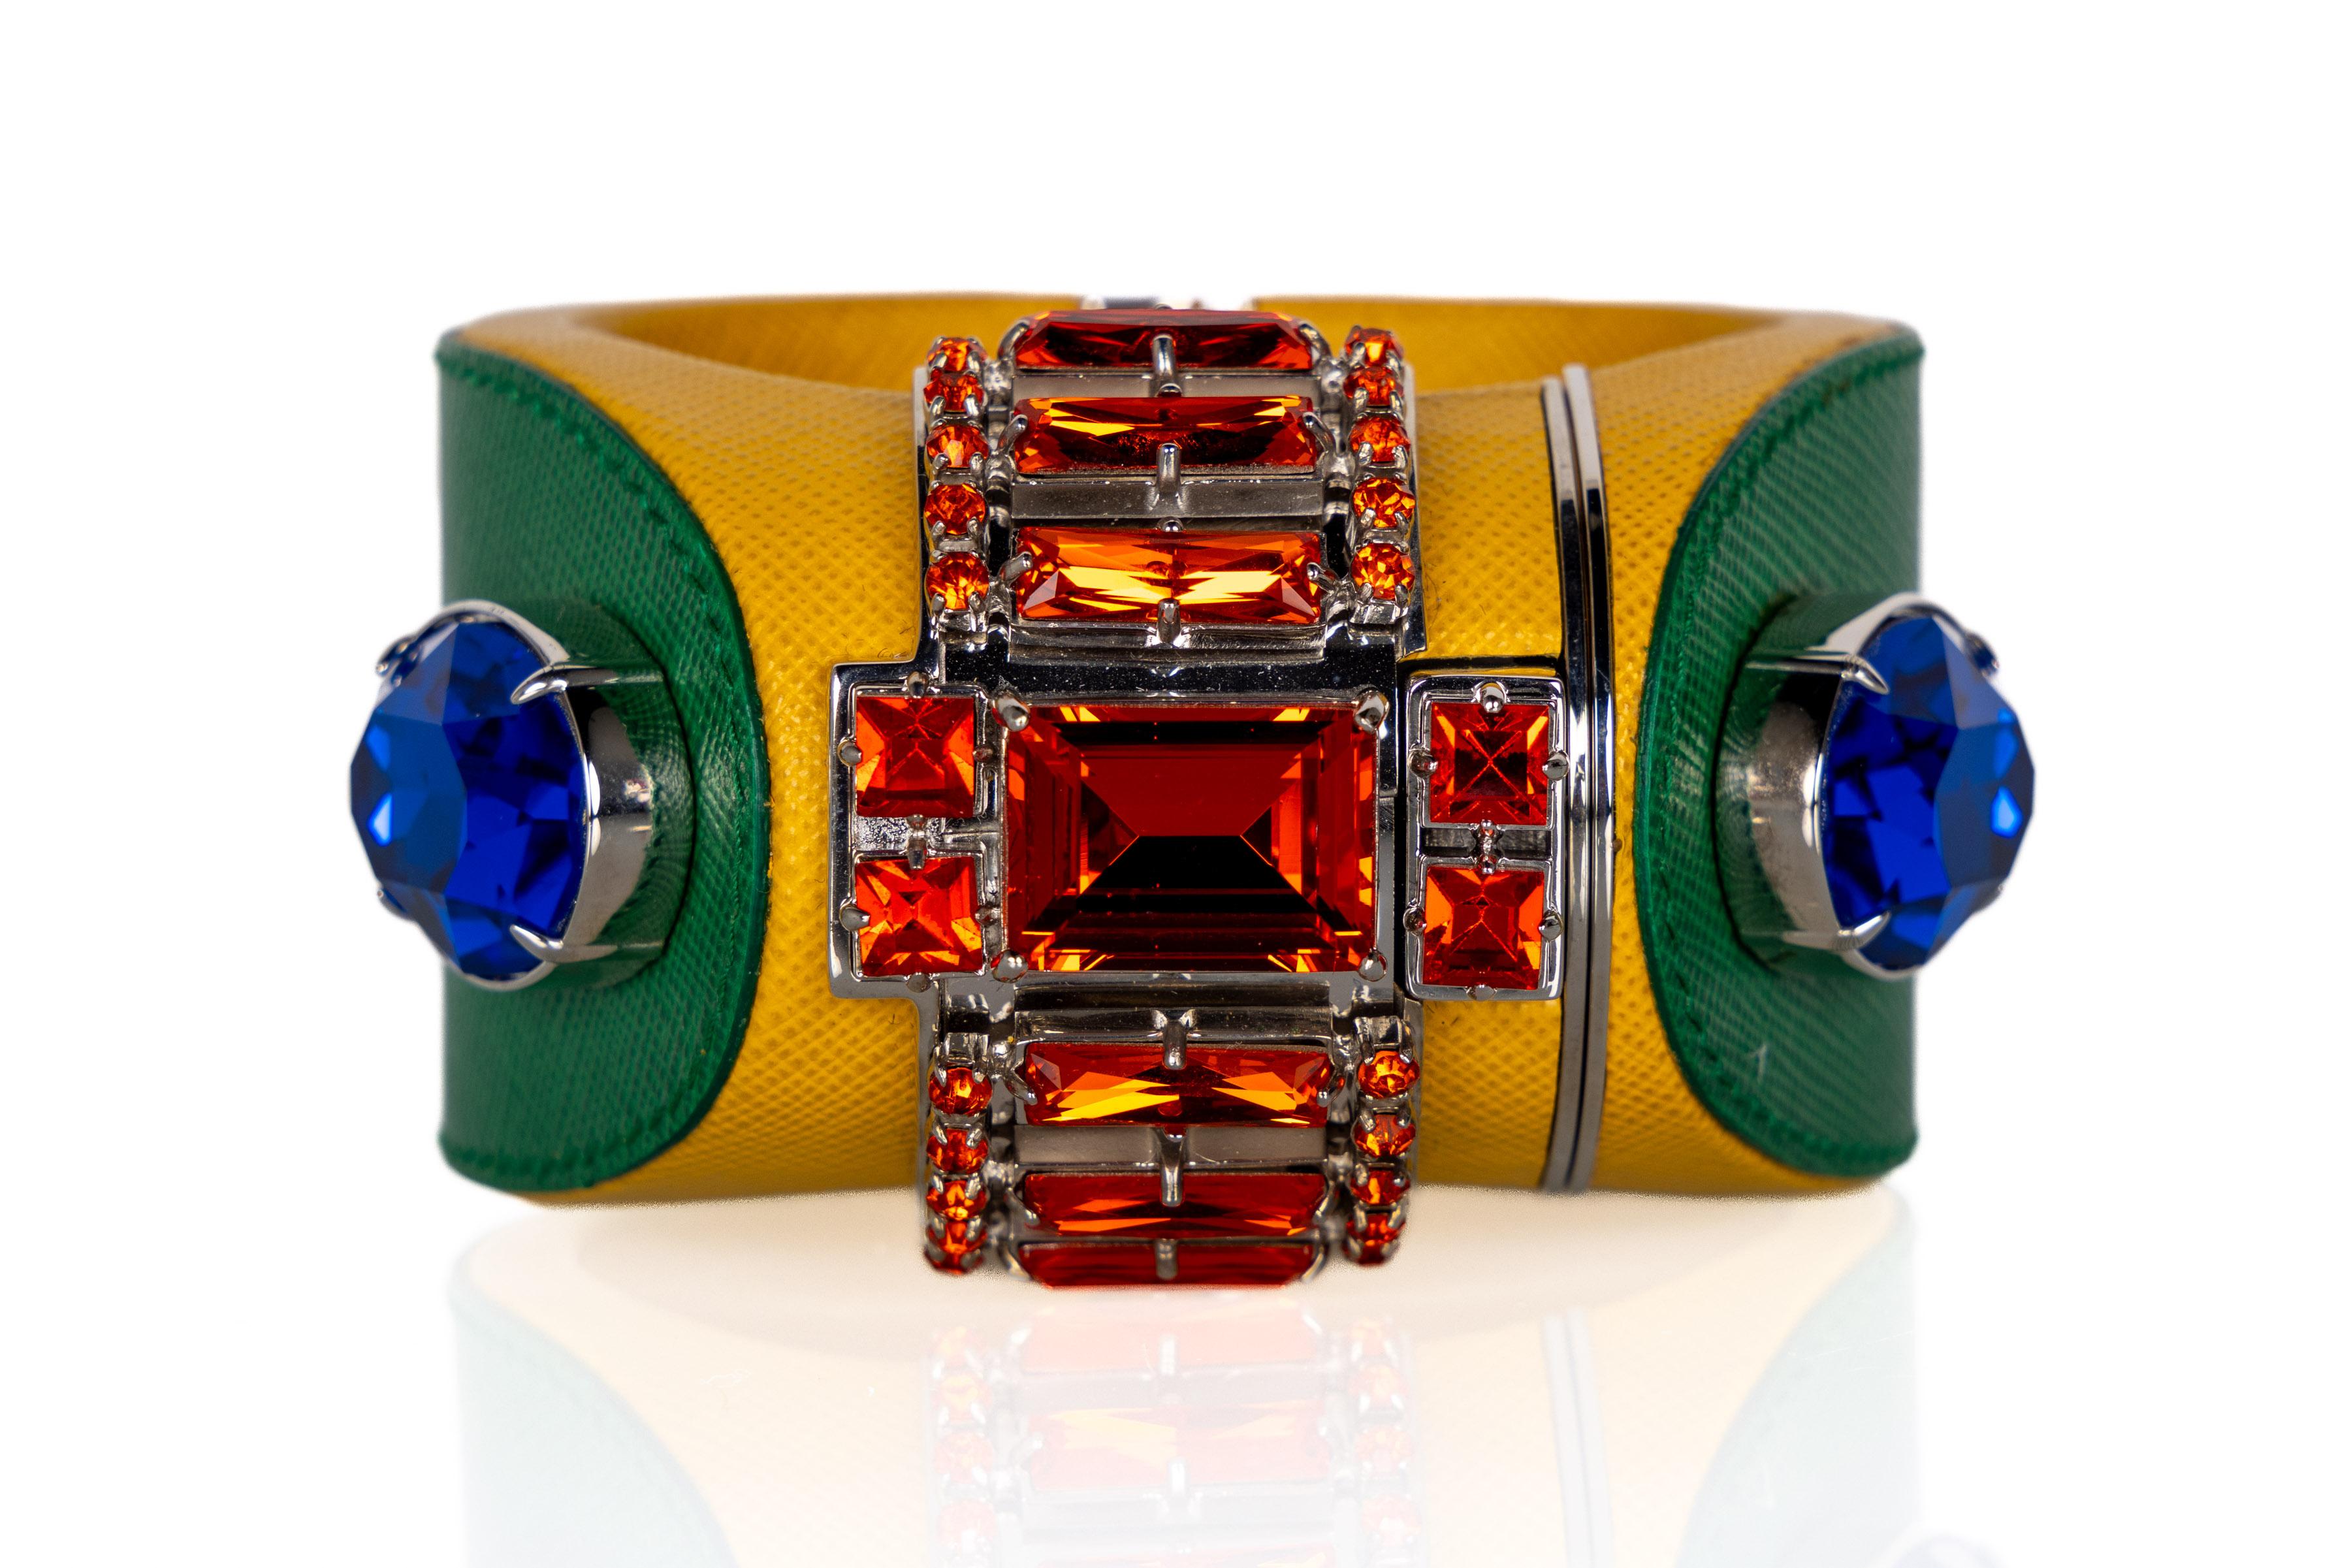 Introducing the vibrant and captivating Prada Saffiano Leather Cuff Bracelet from the Spring 2014 collection, featuring an array of striking colors.  This remarkable accessory combines the luxurious allure of yellow and green Saffiano leather with